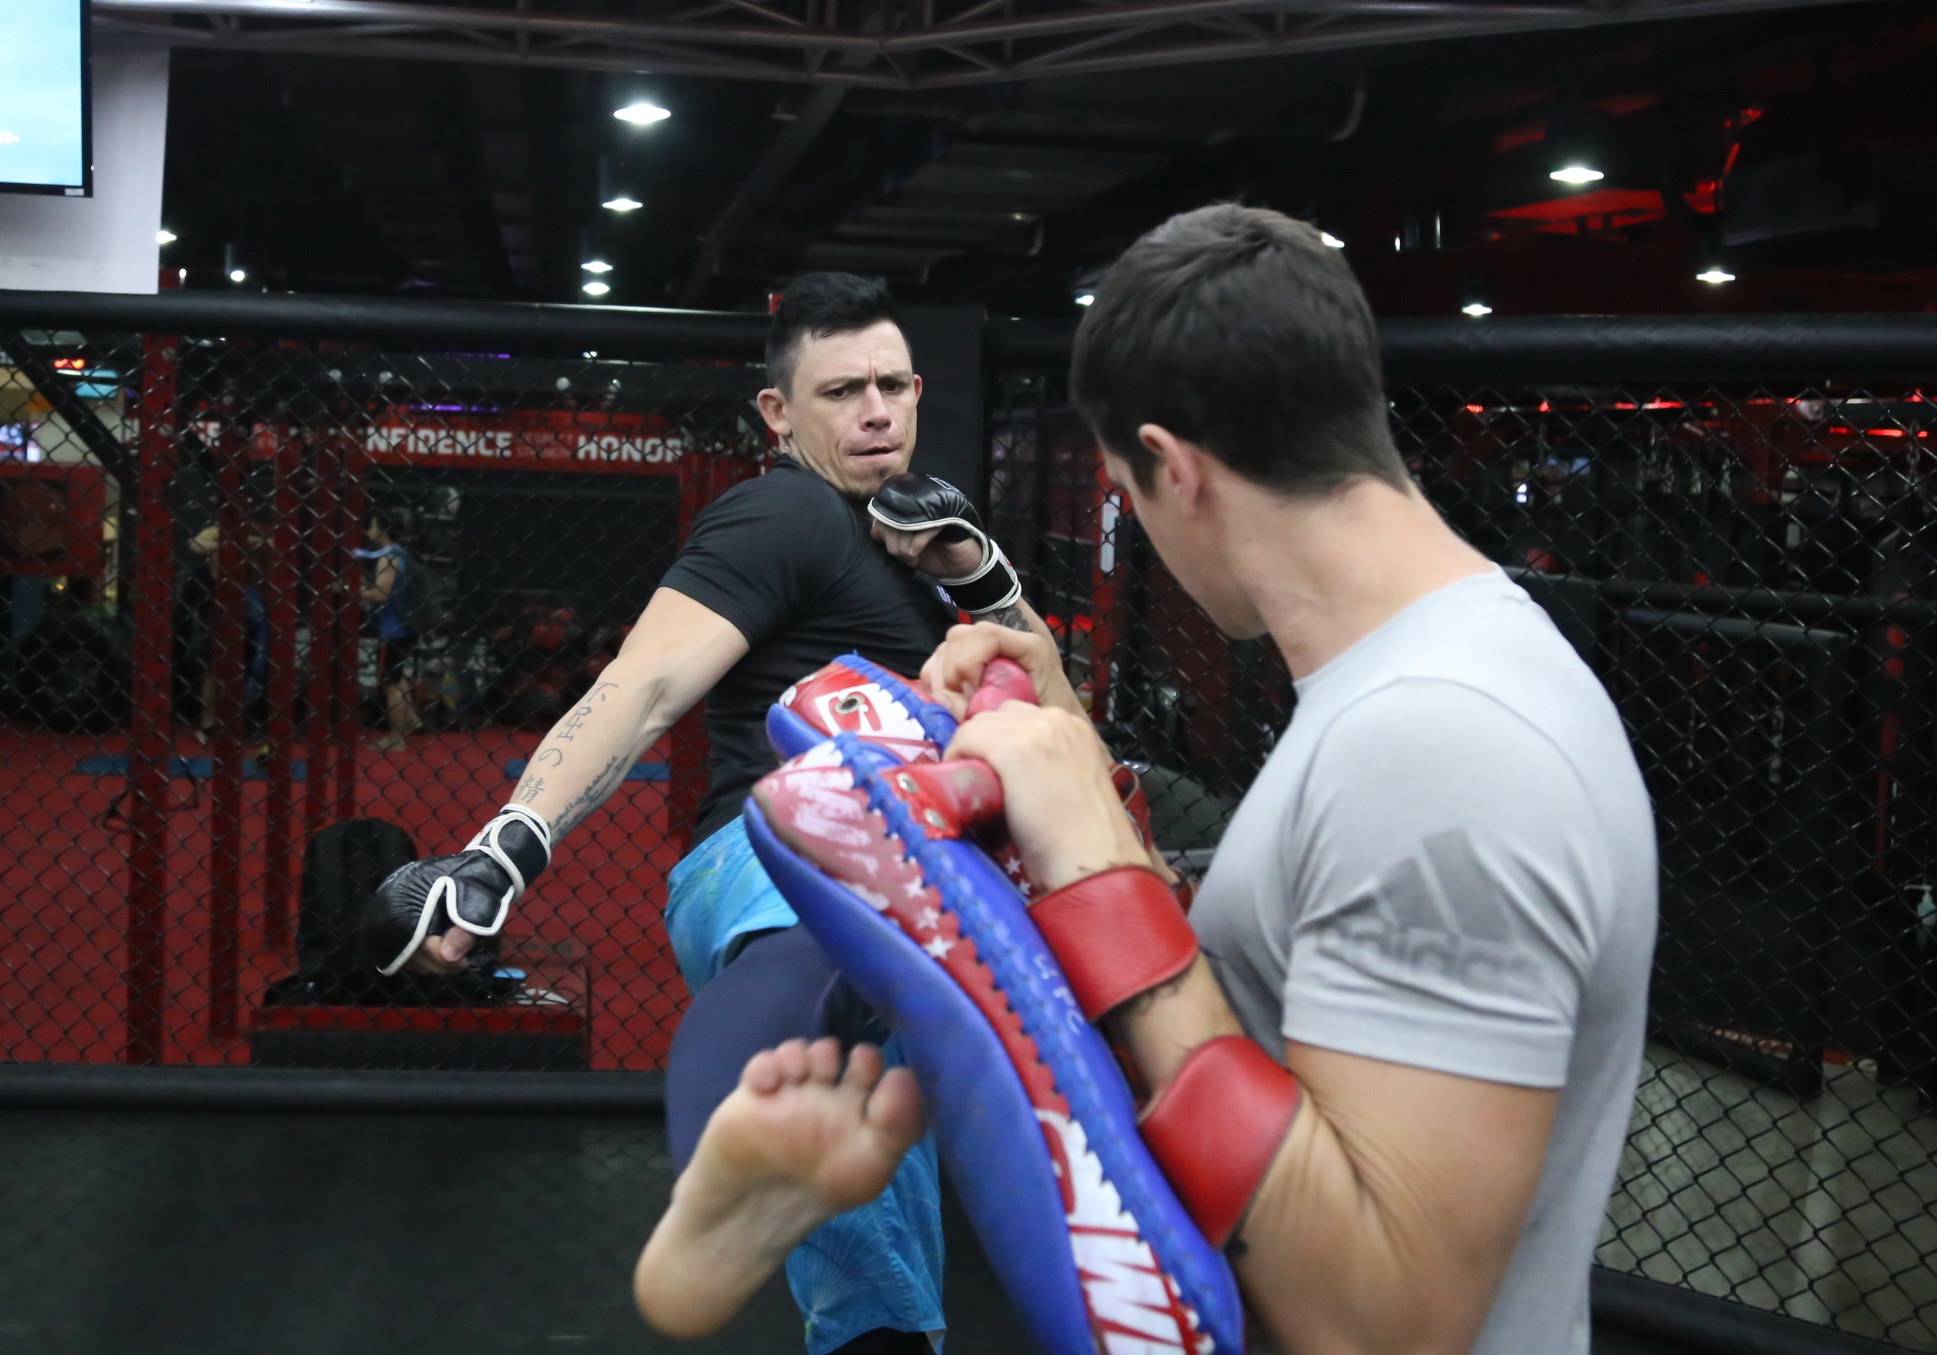 Arnaud Lepont trains at an MMA center in District 2, Ho Chi Minh City. Photo: Tuoi Tre